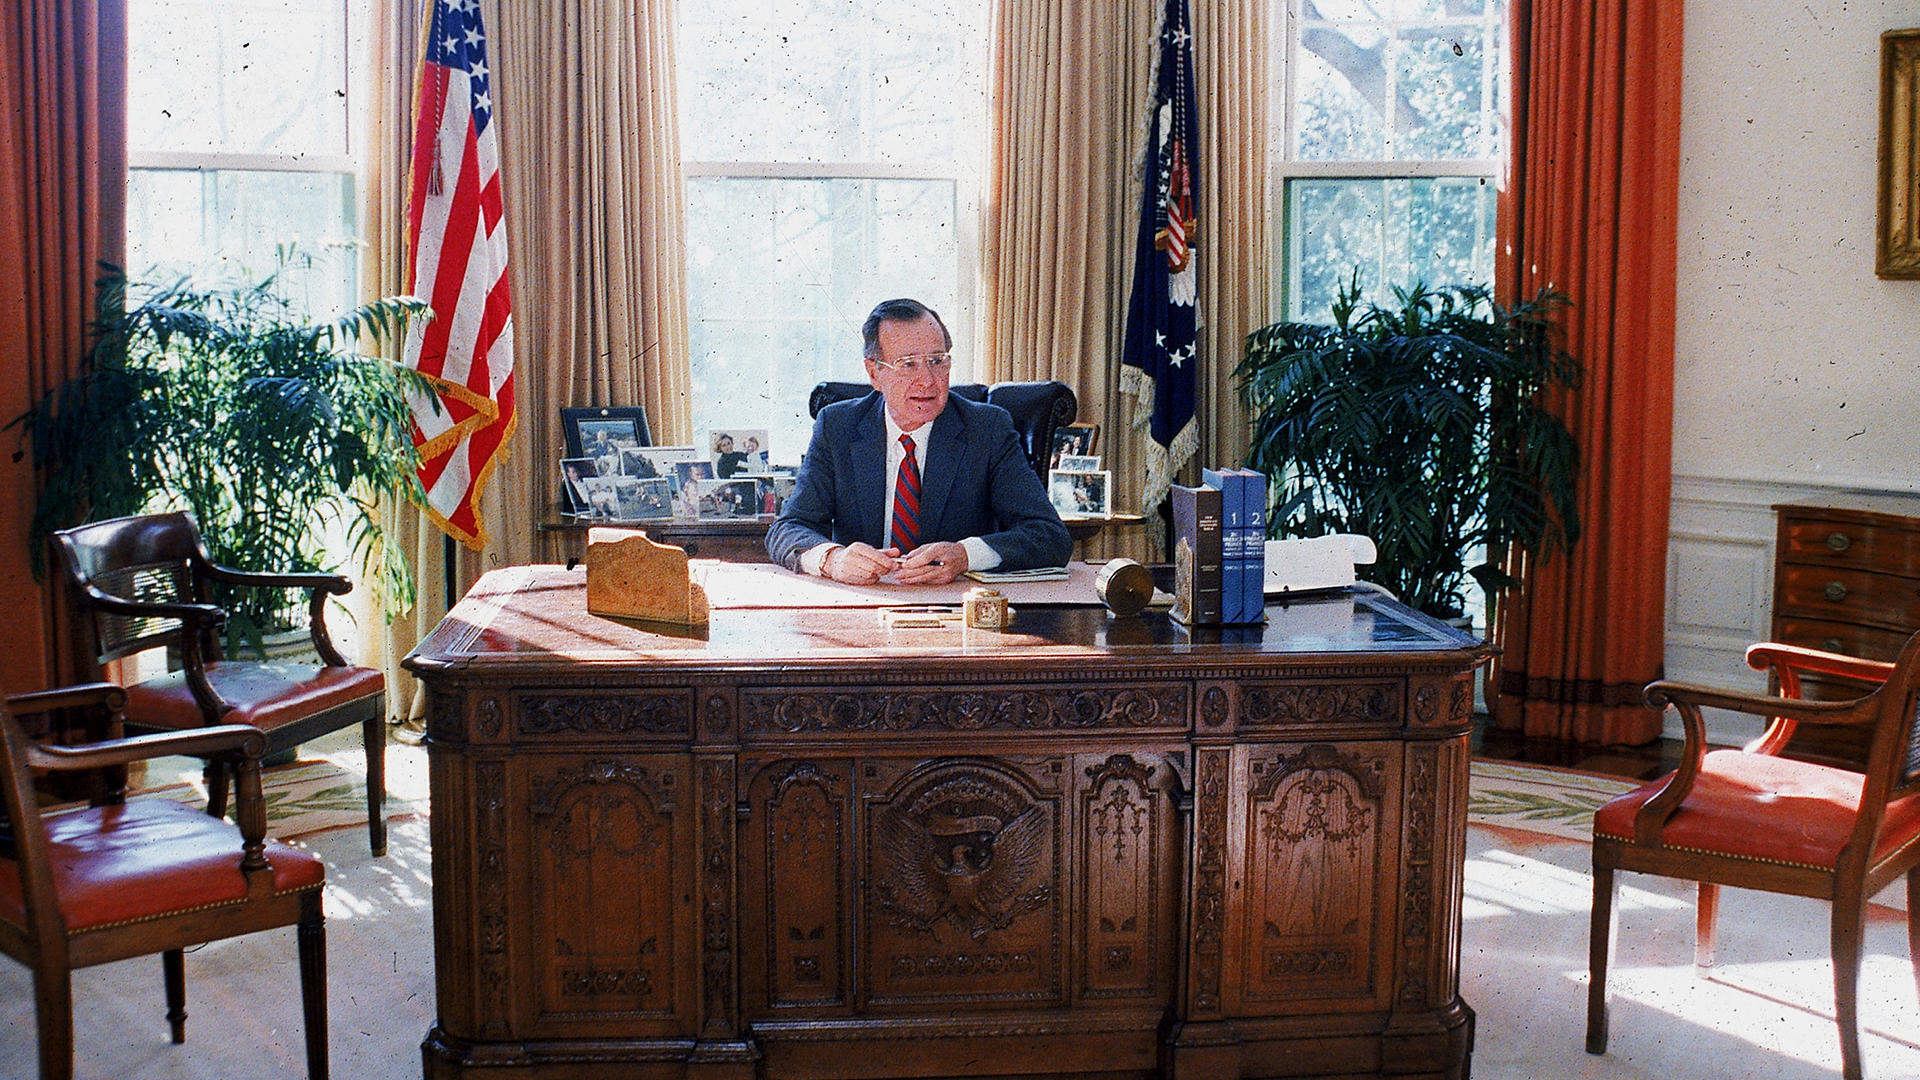 41ST PRESIDENT OF THE USA GEORGE HW BUSH IN THE WHITE HOUSE PUBLICITY PHOTO 